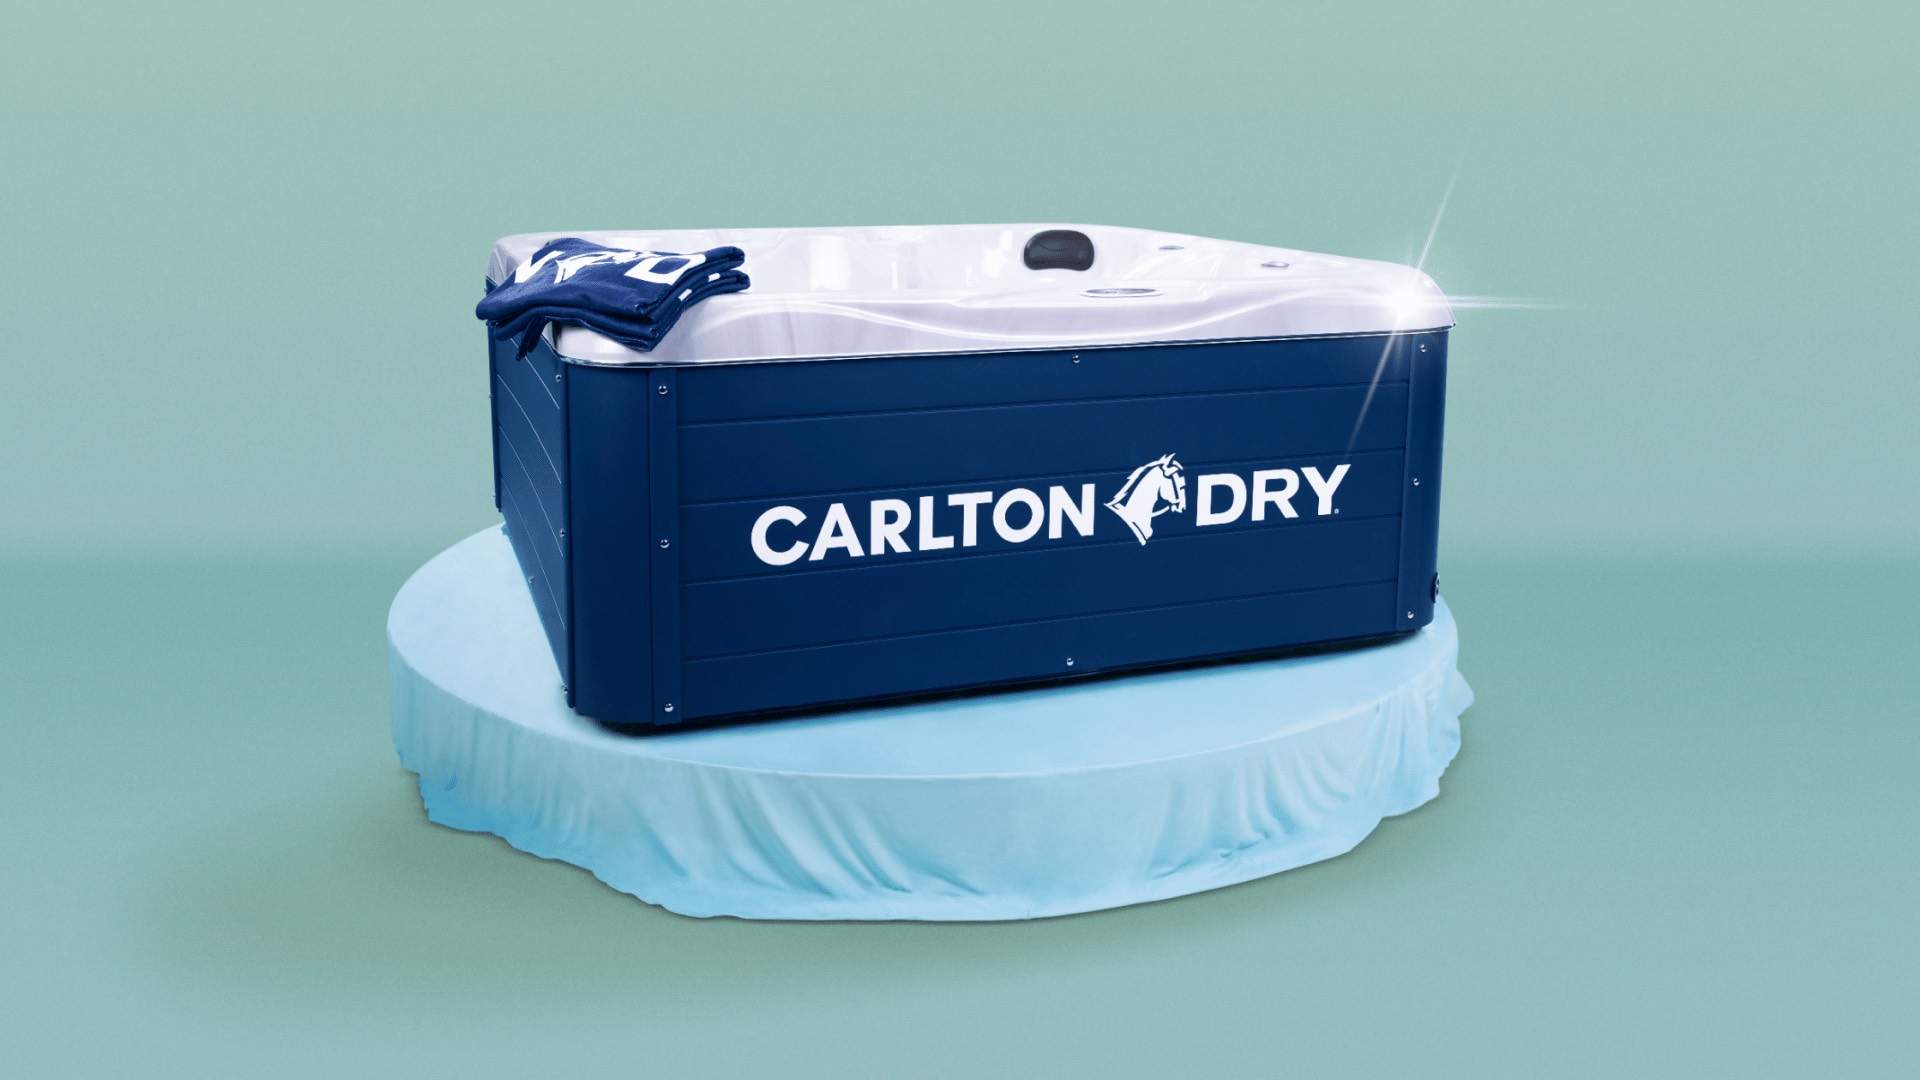 Photo of a Carlton Dry-branded hot tub.